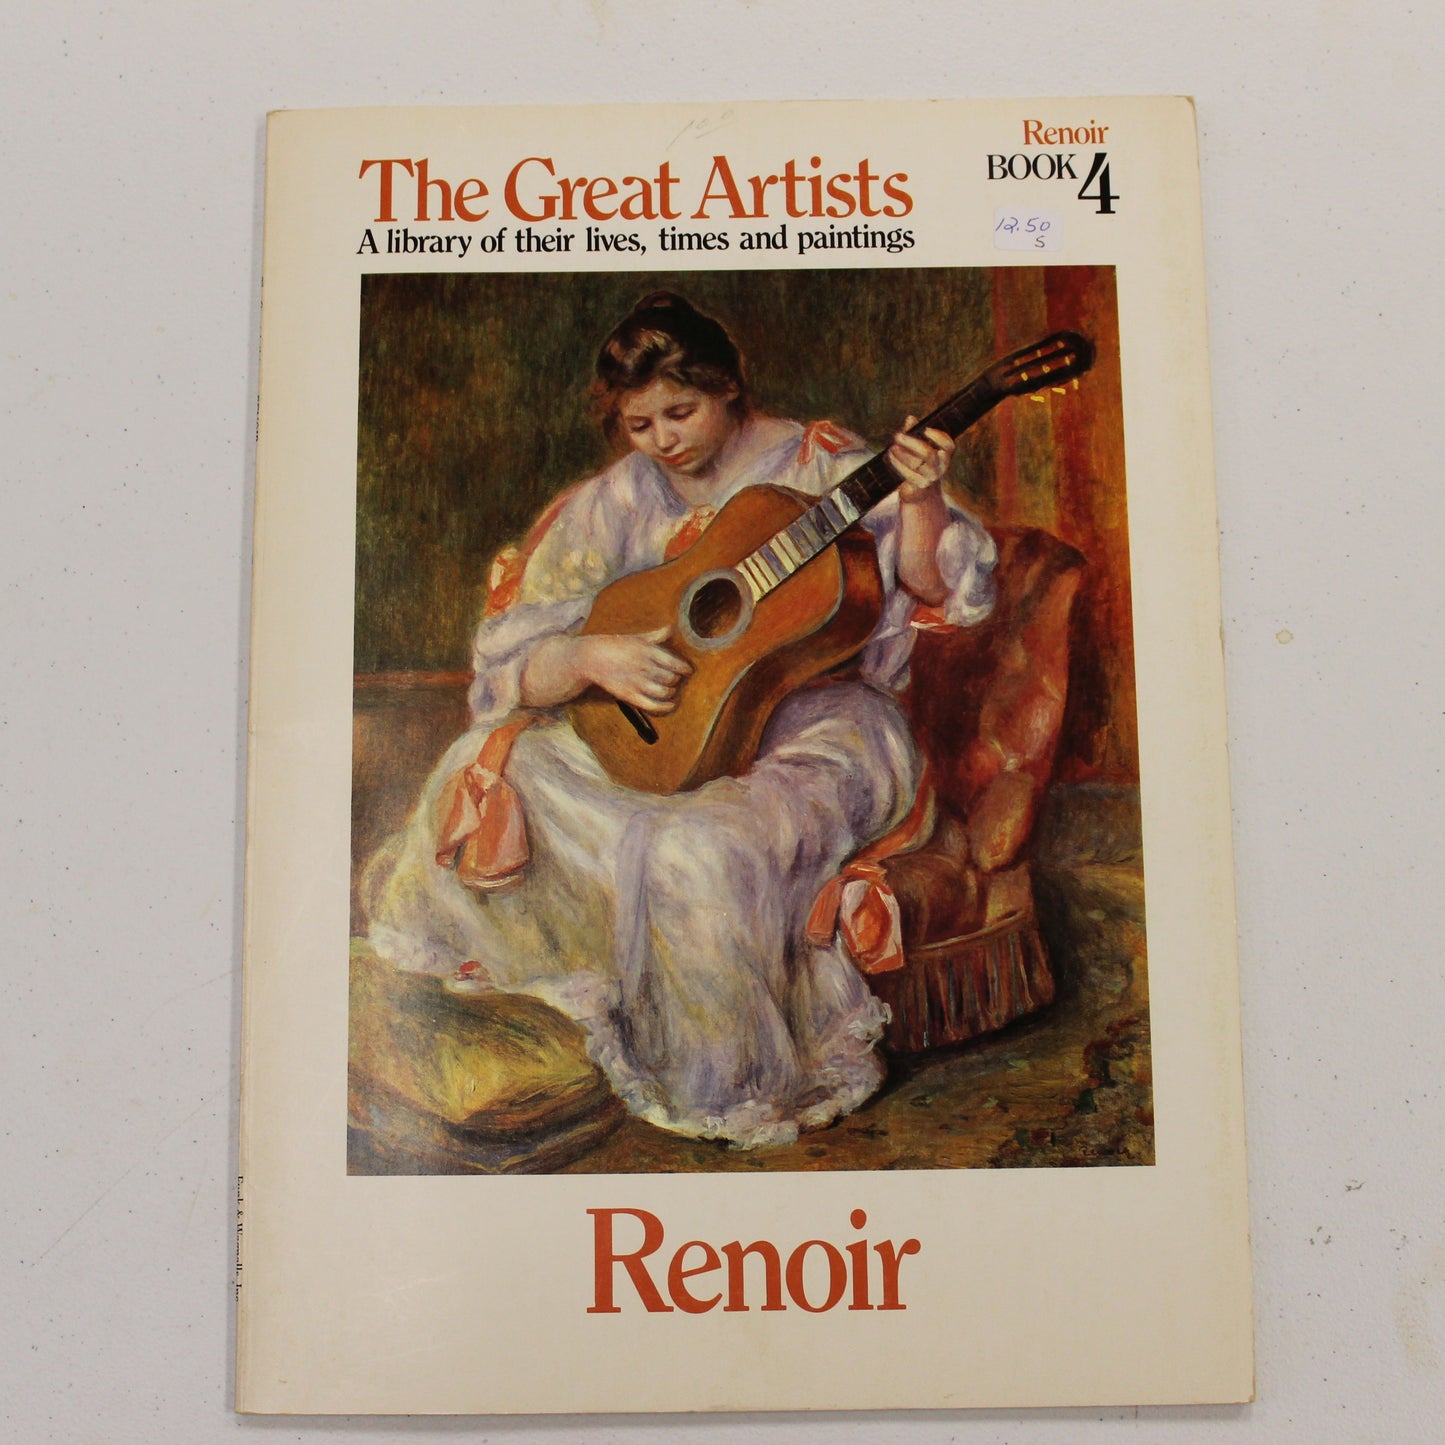 RENOIR BOOK 4: THE GREAT ARTISTS A LIBRARY OF THEIR LIVES, TIMES AND PAINTINGS